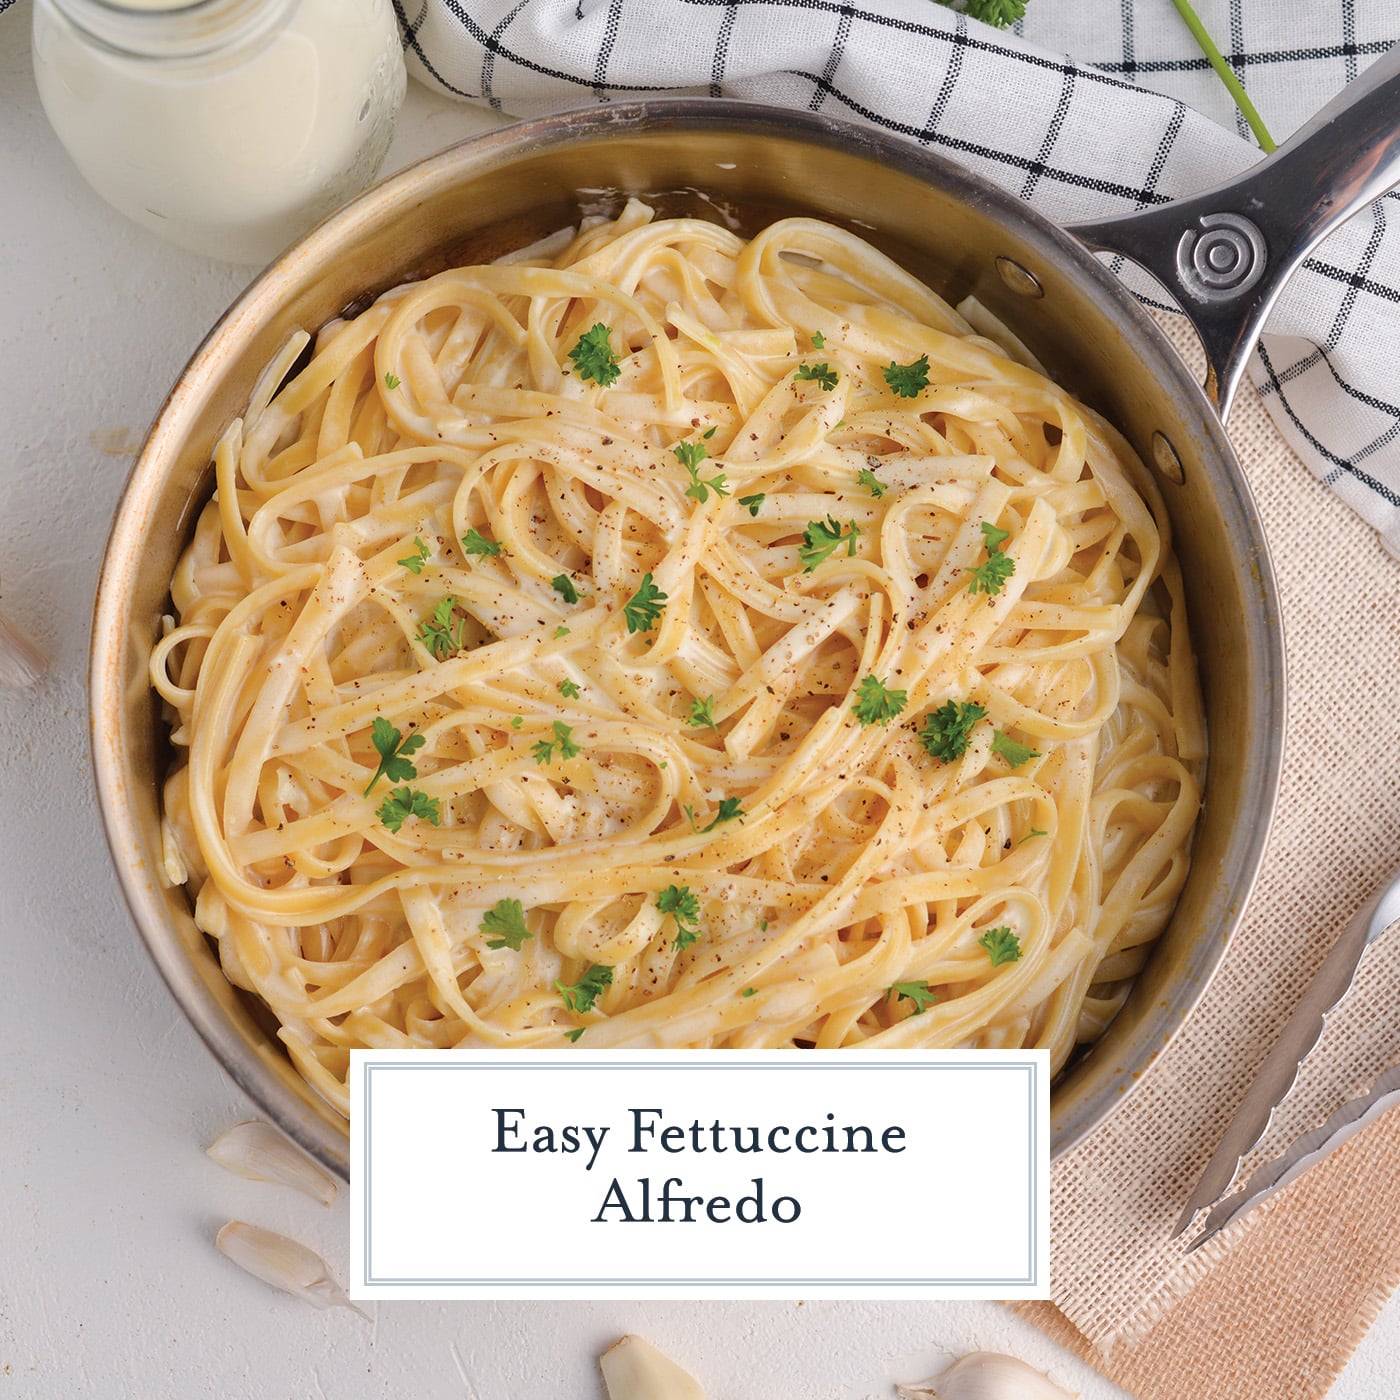 plate of fettuccine alfredo with text overlay for facebook